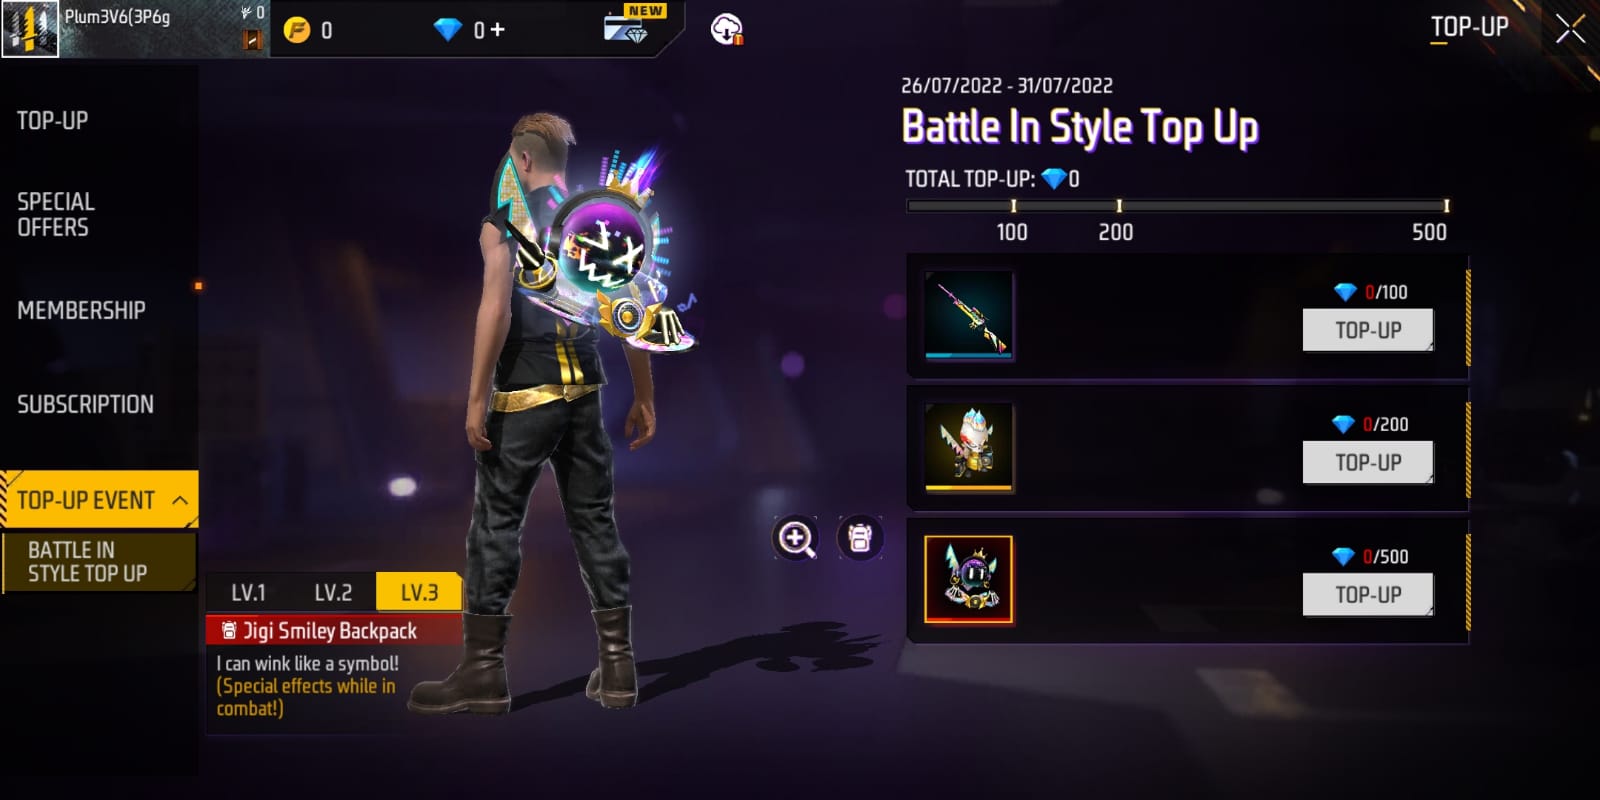 Garena announced the Free Fire MAX Battle in Style top-up event which ends very soon. Check how to grab the Digi Smiley backpack and other rewards for free.